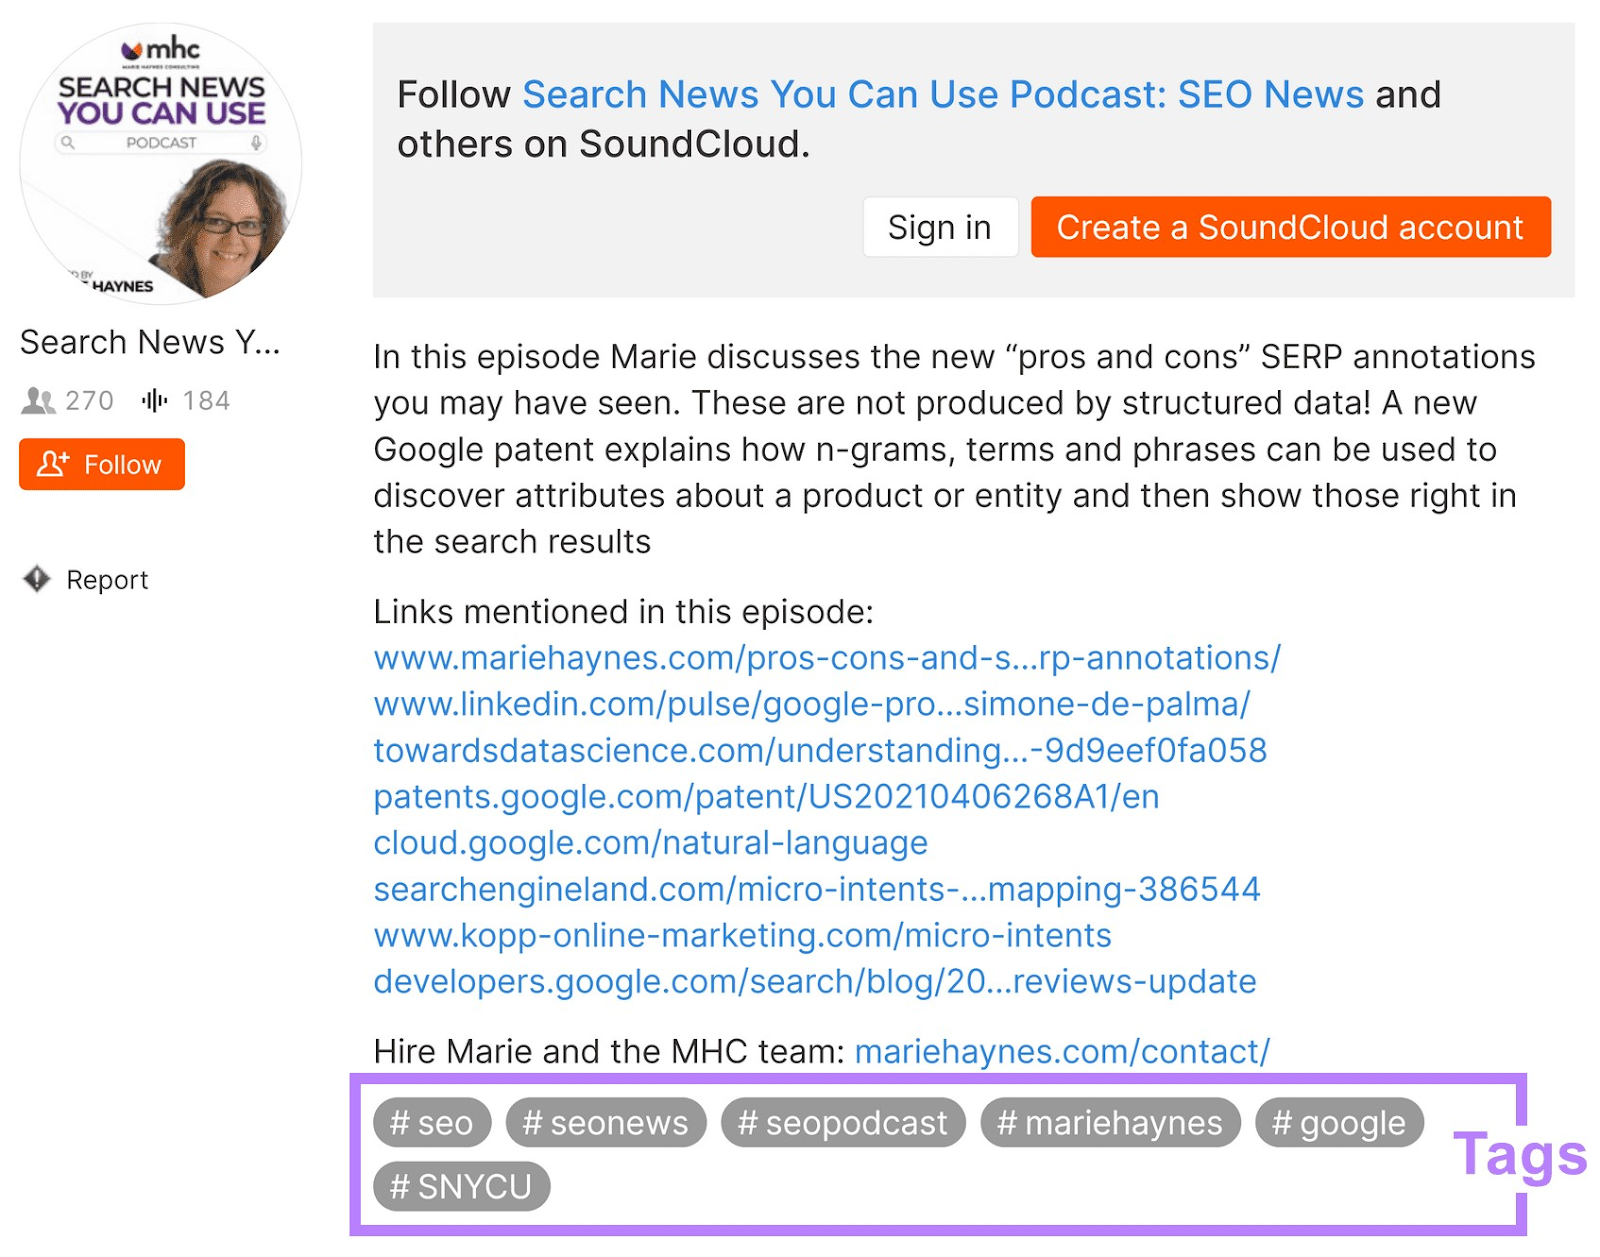 Tags section highlighted under Search News You Can Use Podcast